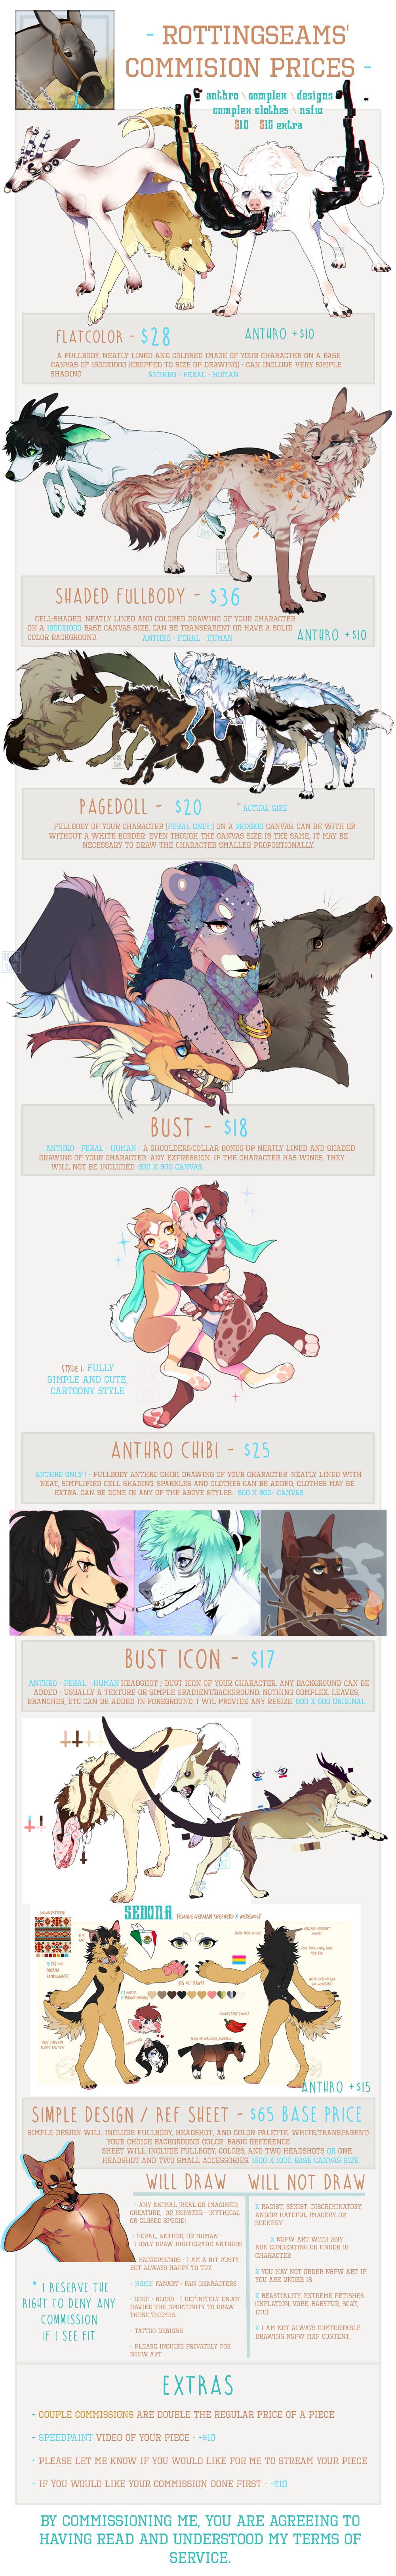 ROTT'S COMMISSION PRICES 2017 - CLOSED